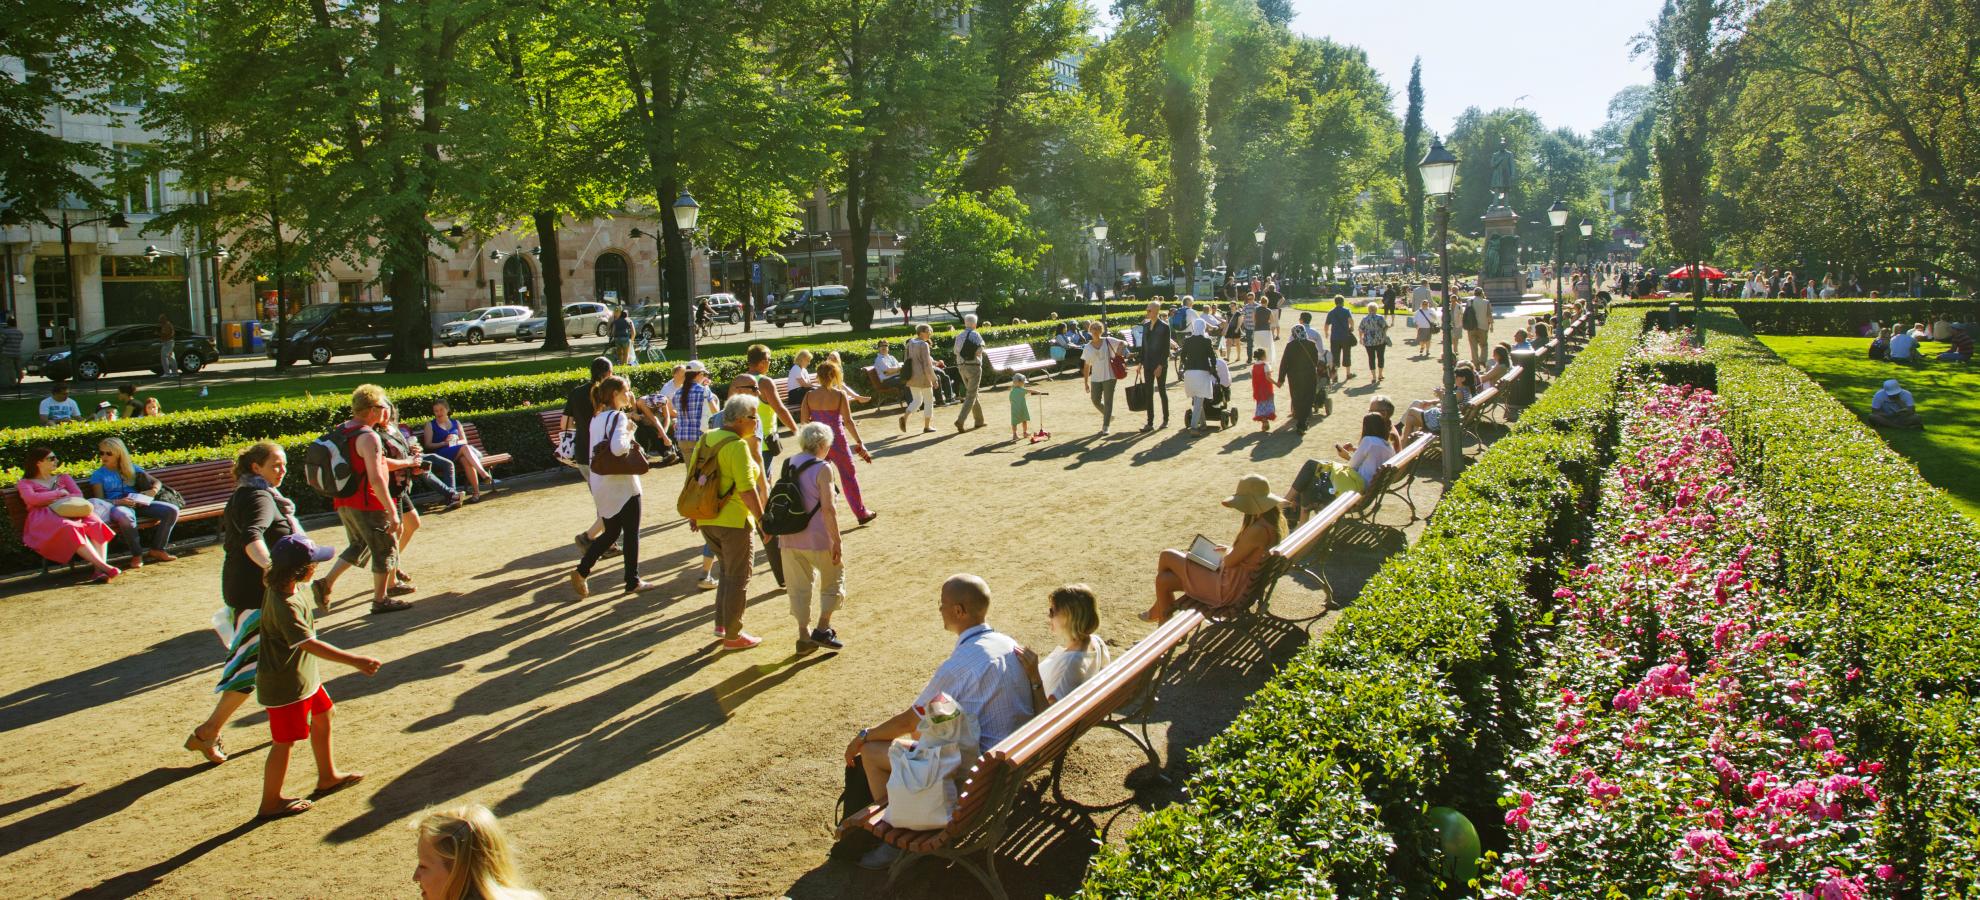 A view looking down the length of part of Esplanadi park in summertime. Surrounded by neat bushes, flower beds and trees, crowds of people walk up and down the main walkway.  